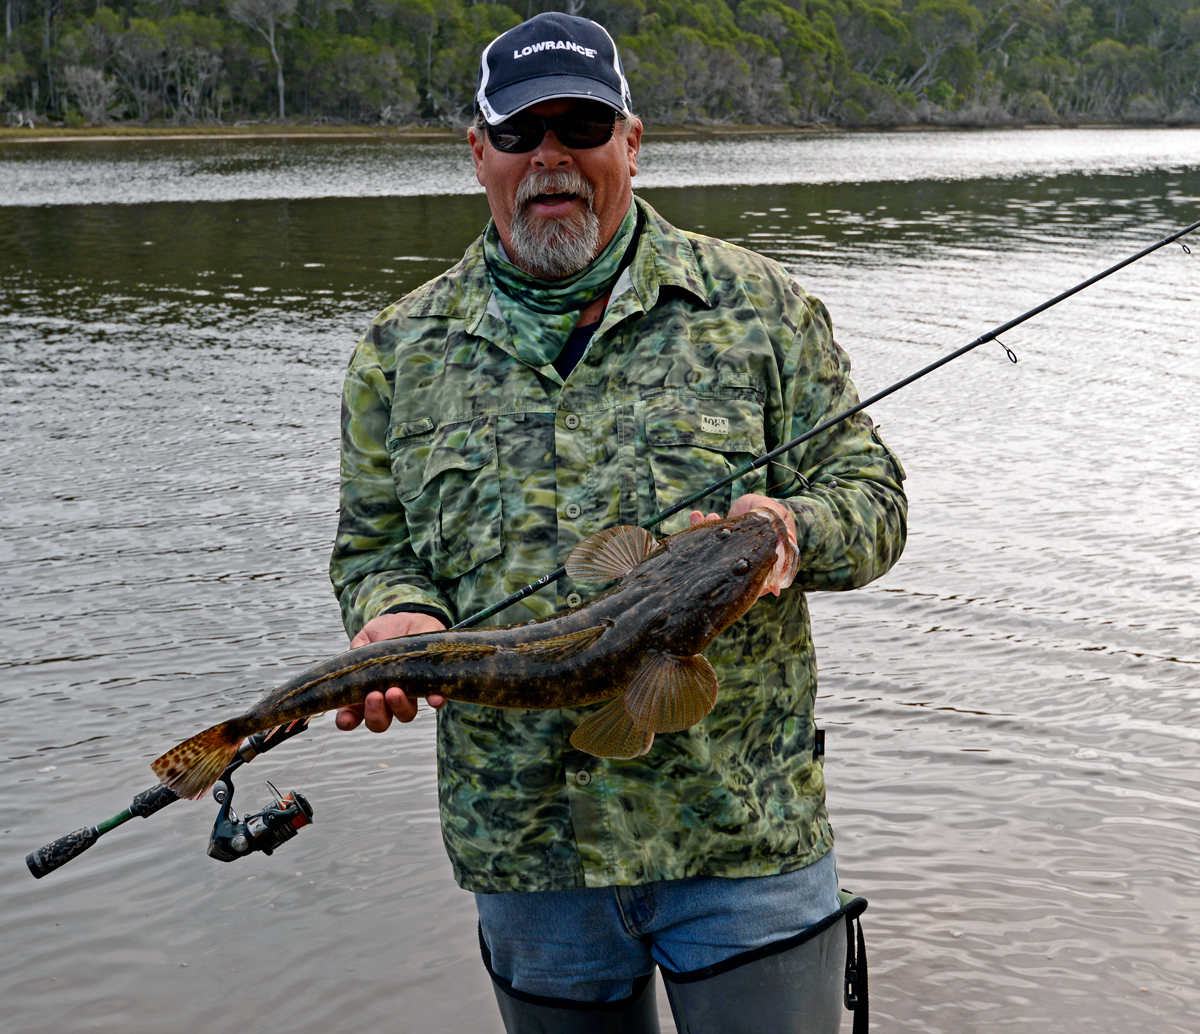 There are plenty of dusky flathead swimming in Mallacoota, including some a lot bigger than this reasonable specimen.